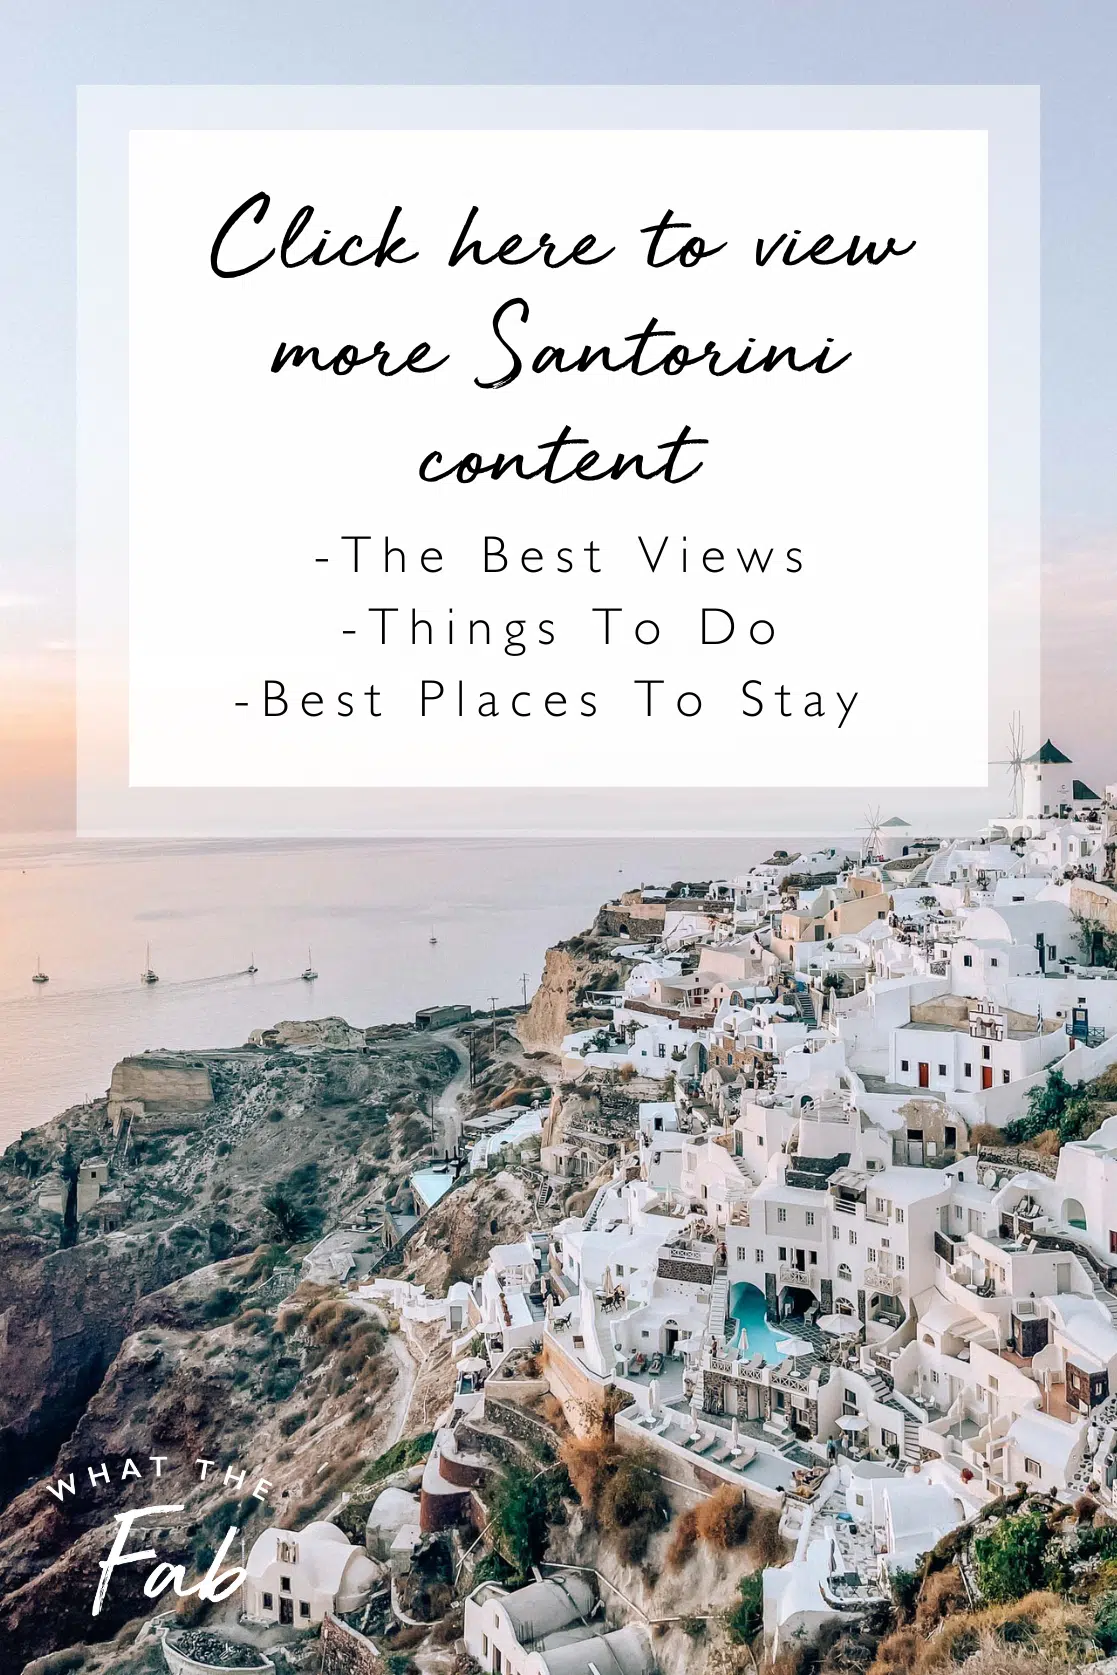 Nightlife in Santorini - All you Need to Know - holidify